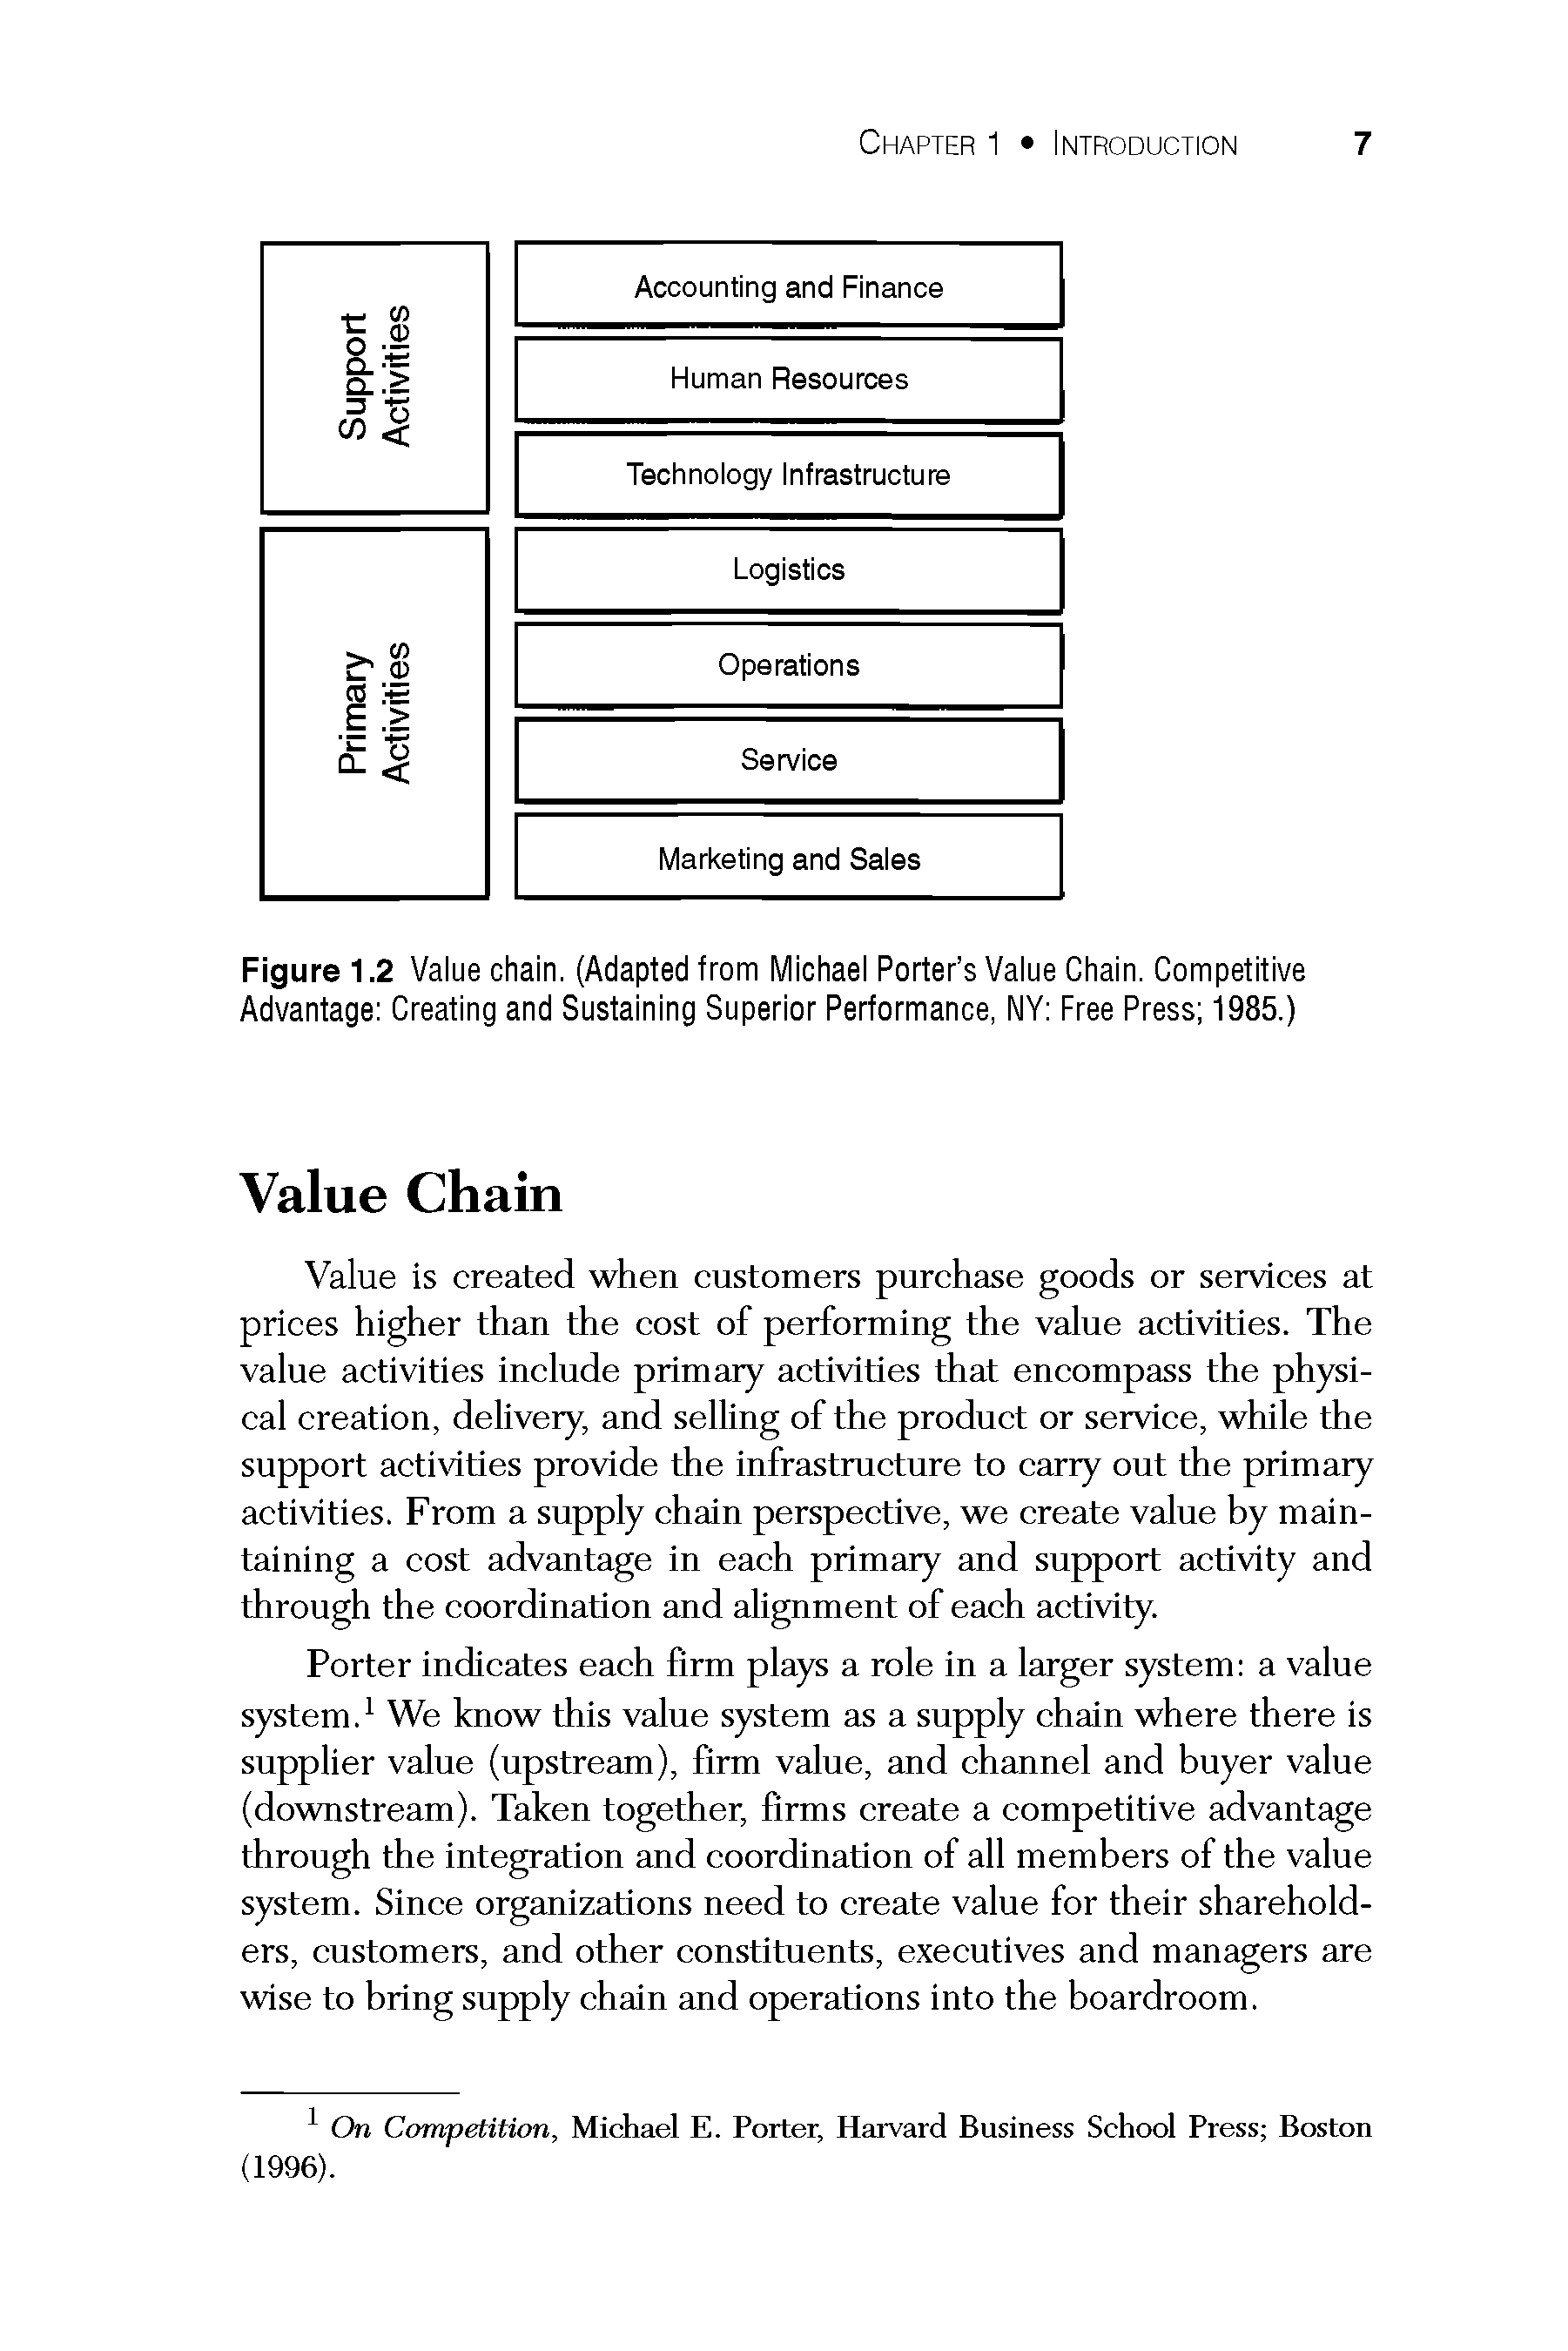 Figure 1.2 Value chain. (Adapted from Michael Porter s Value Chain. Competitive Advantage Creating and Sustaining Superior Performance, NY Free Press 1985.)...